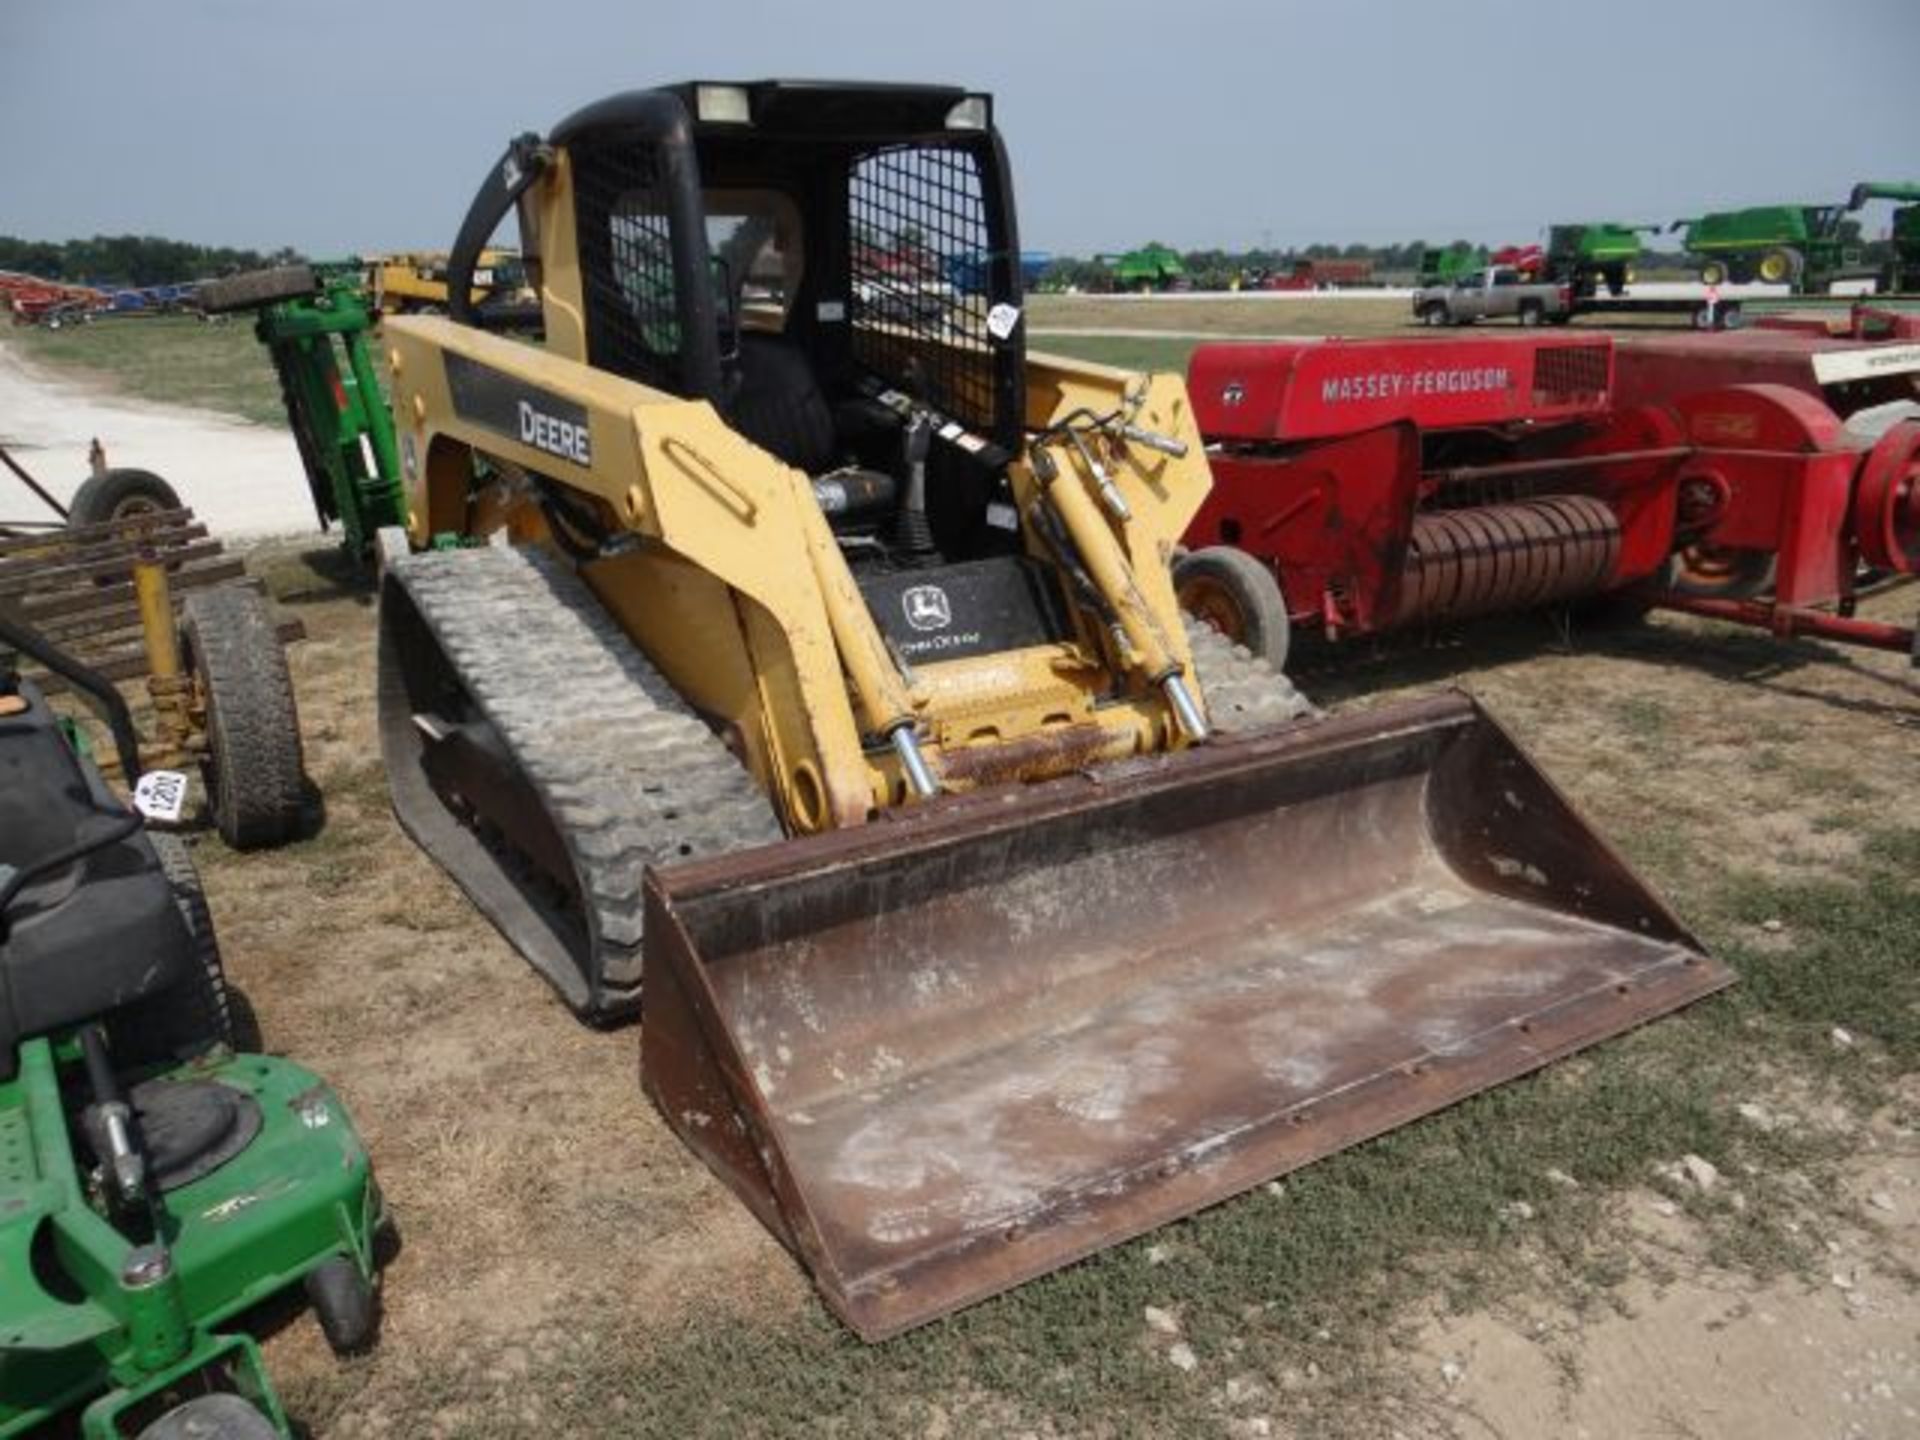 JD CT332 Skid Steer, 2008 #150551, 2130 hrs, 80hp, OS, Hand Controls, 80% Tracks, 84" Bucket - Image 2 of 4